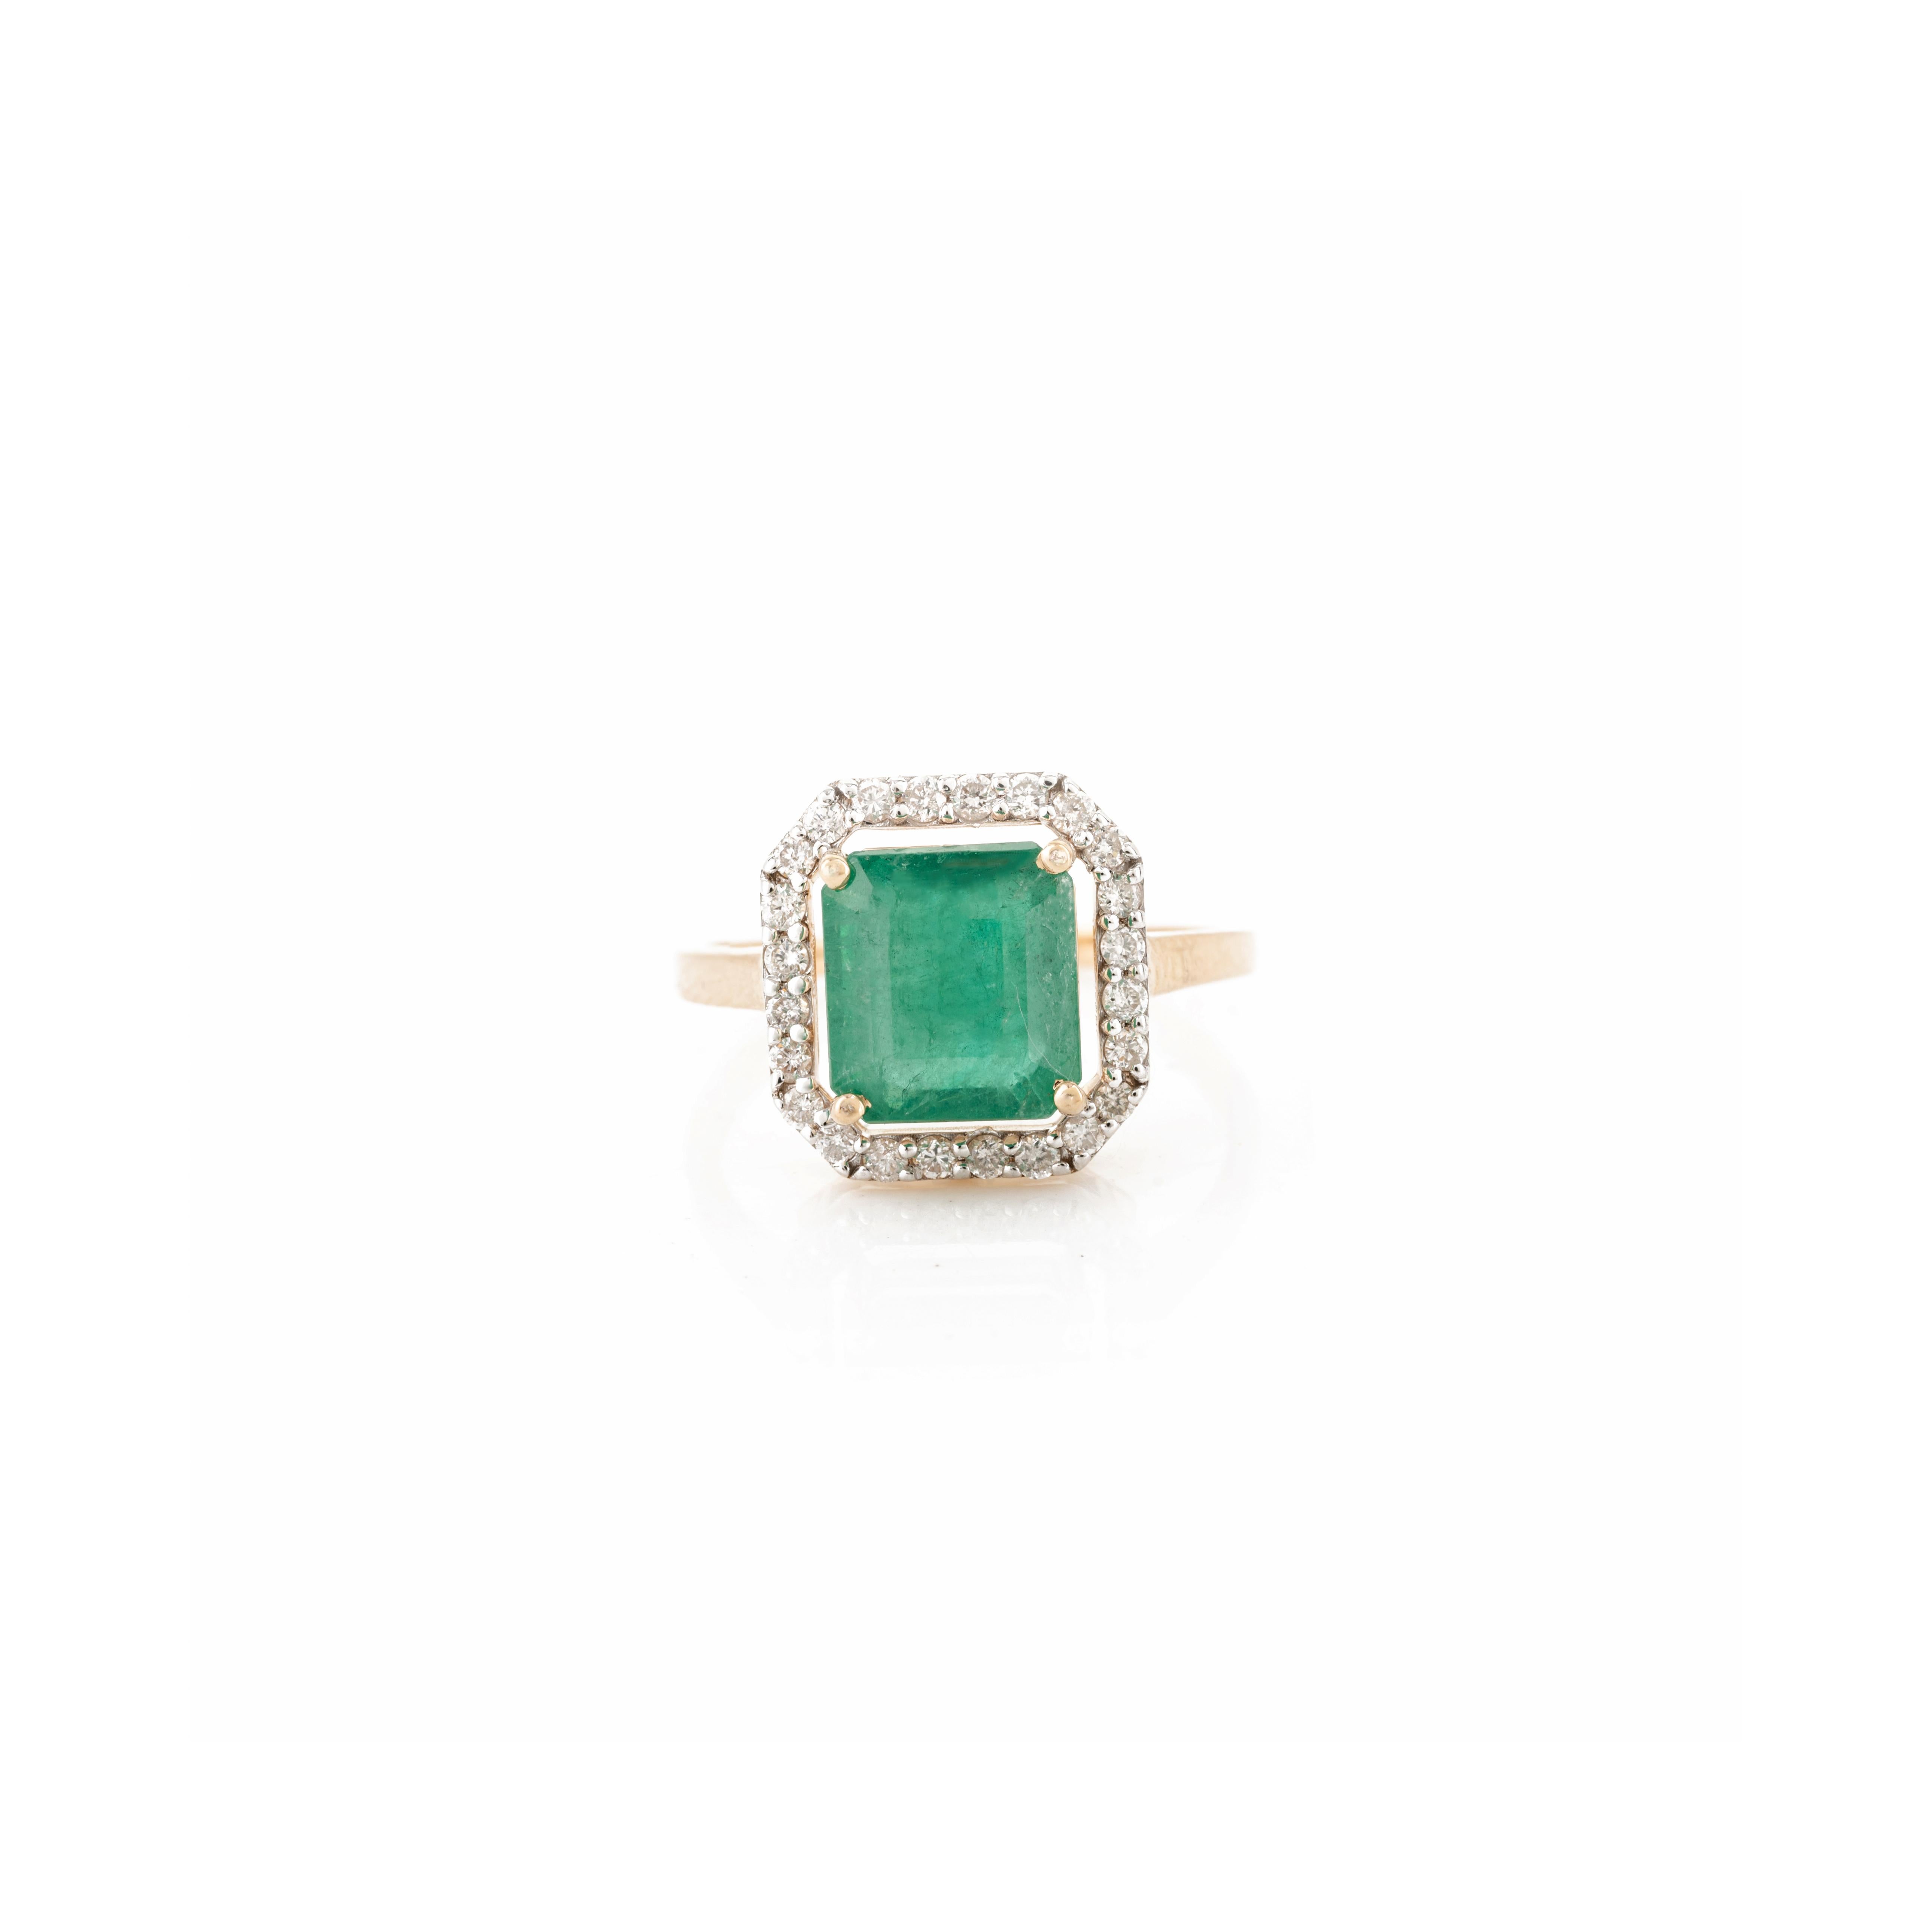 For Sale:  1.5 Carat Square Cut Emerald Diamond Halo Ring for Women in 18k Yellow Gold 3